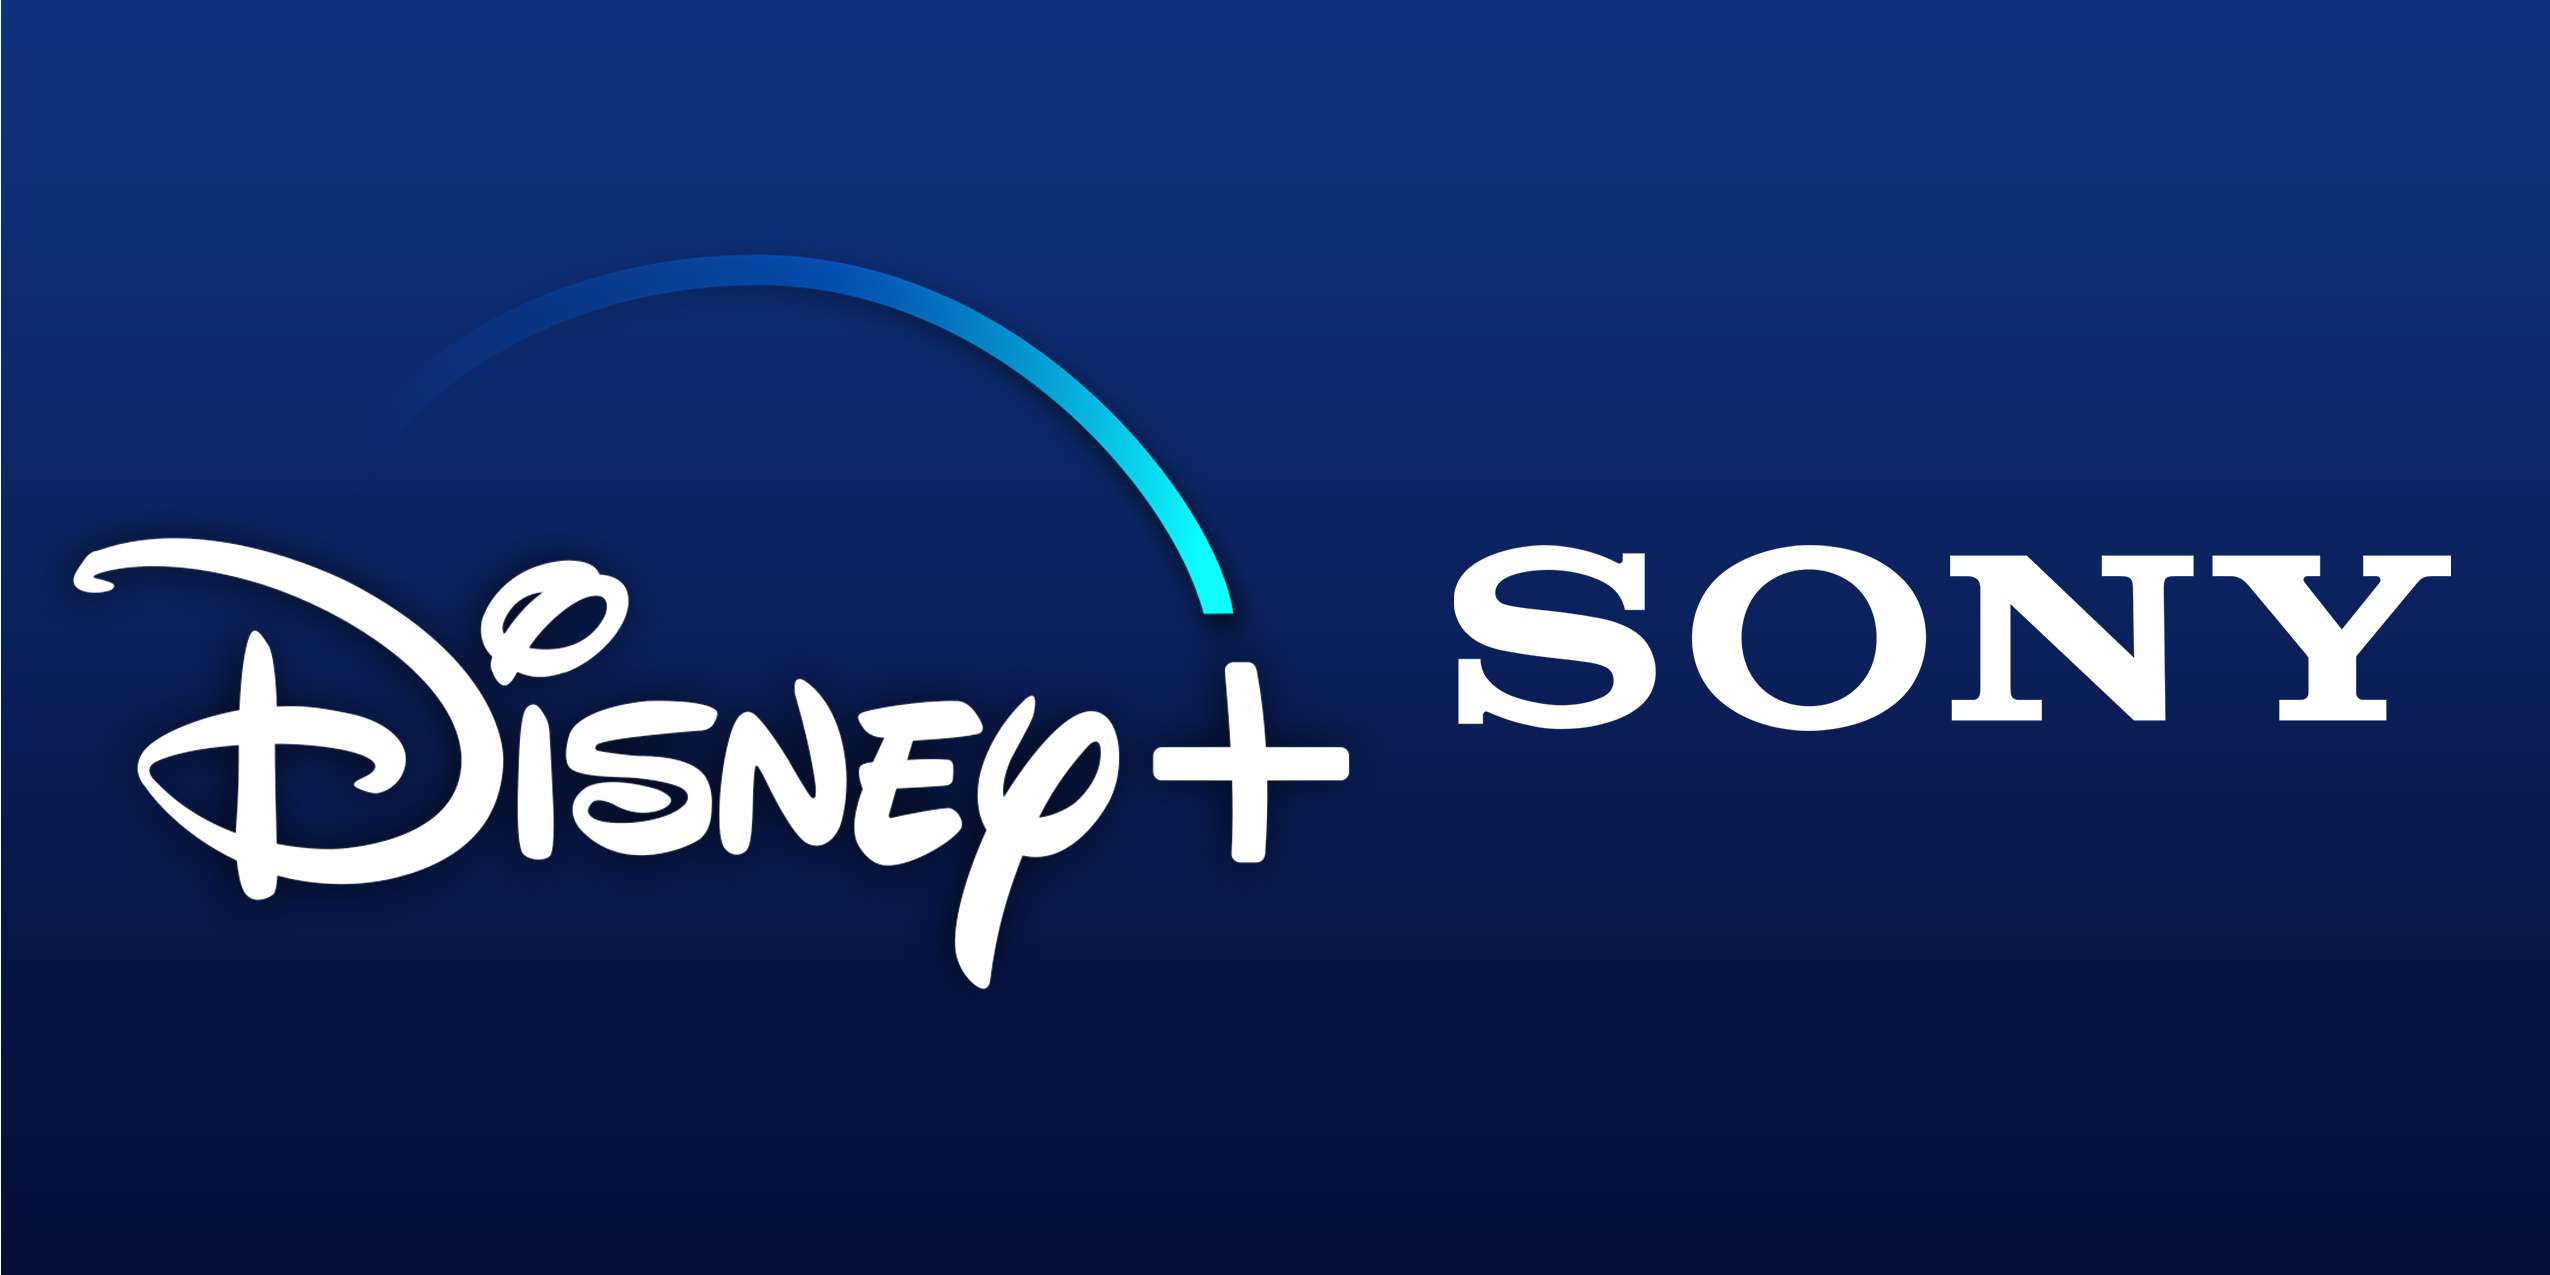 How to Watch Disney Plus on Your Sony Smart TV